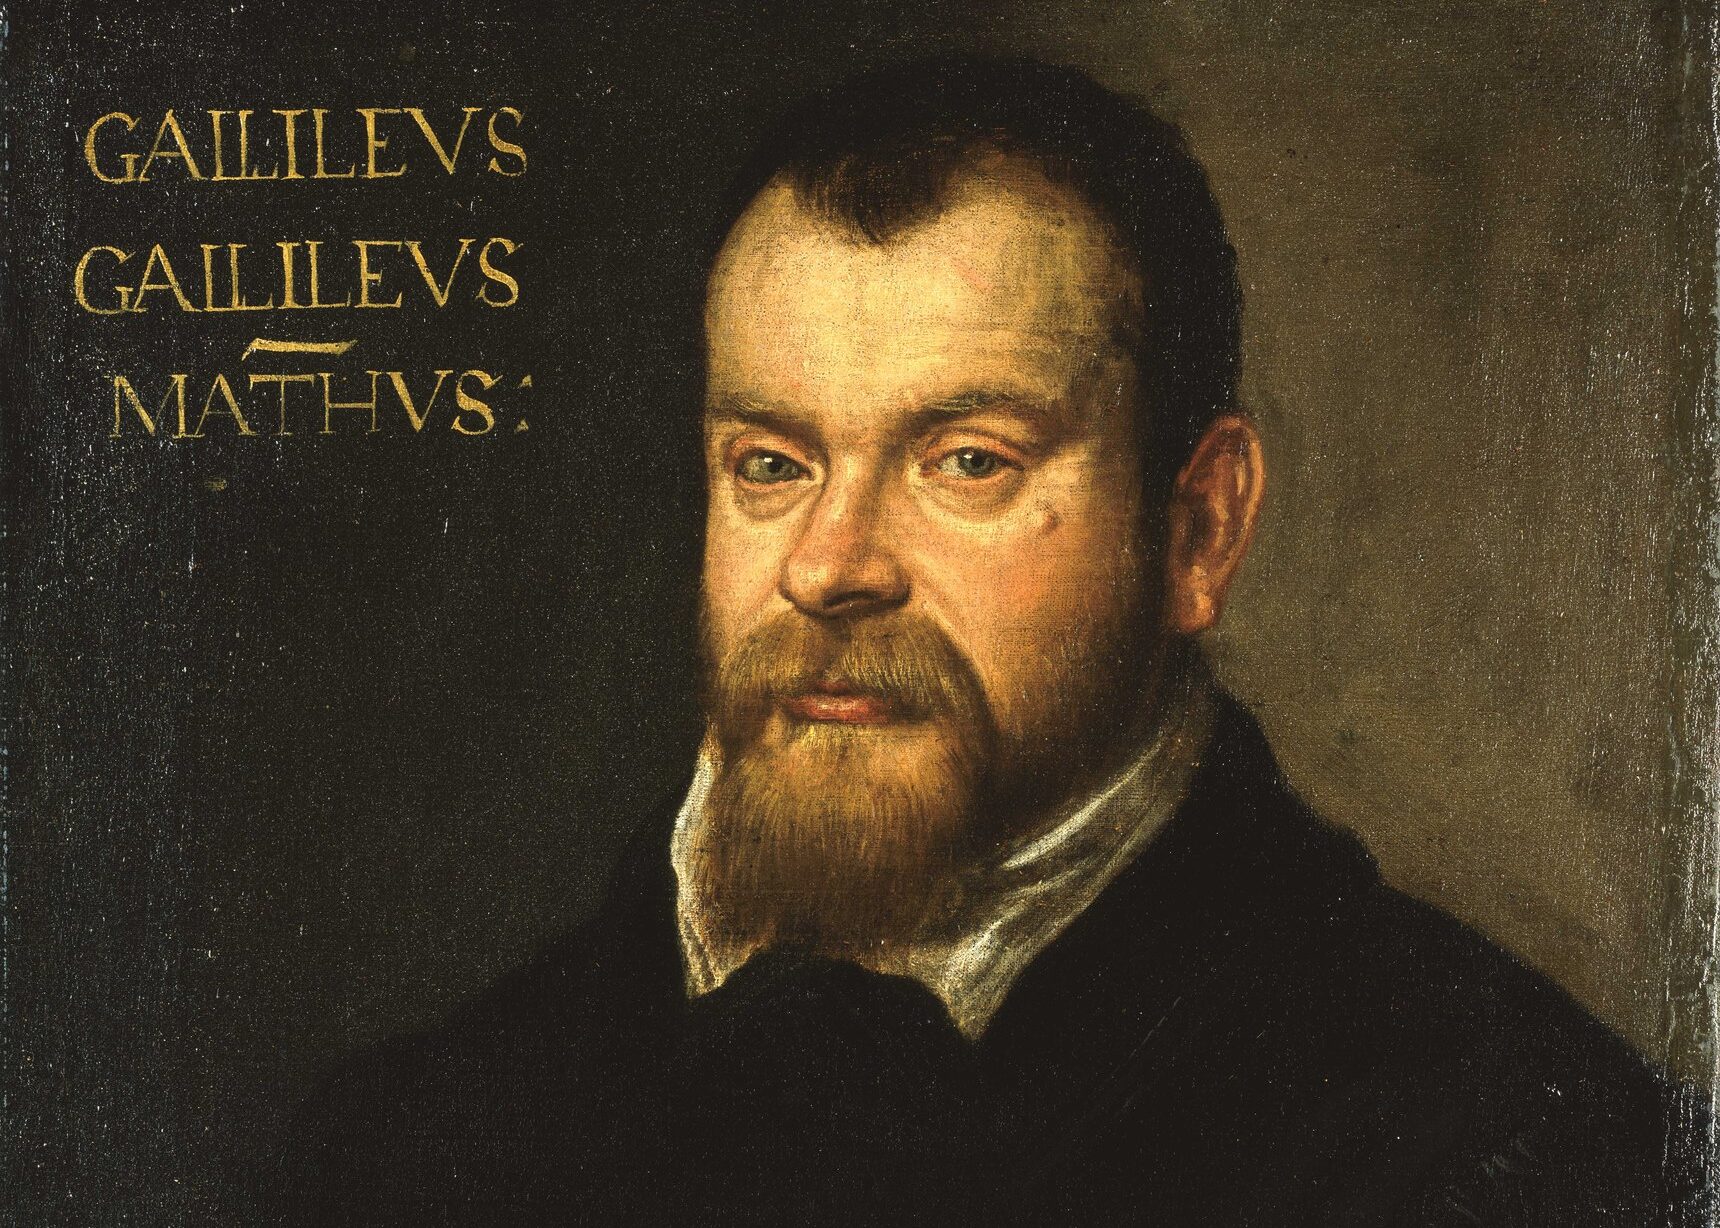 Researcher discovers another astronomy book written by Galileo Galilei